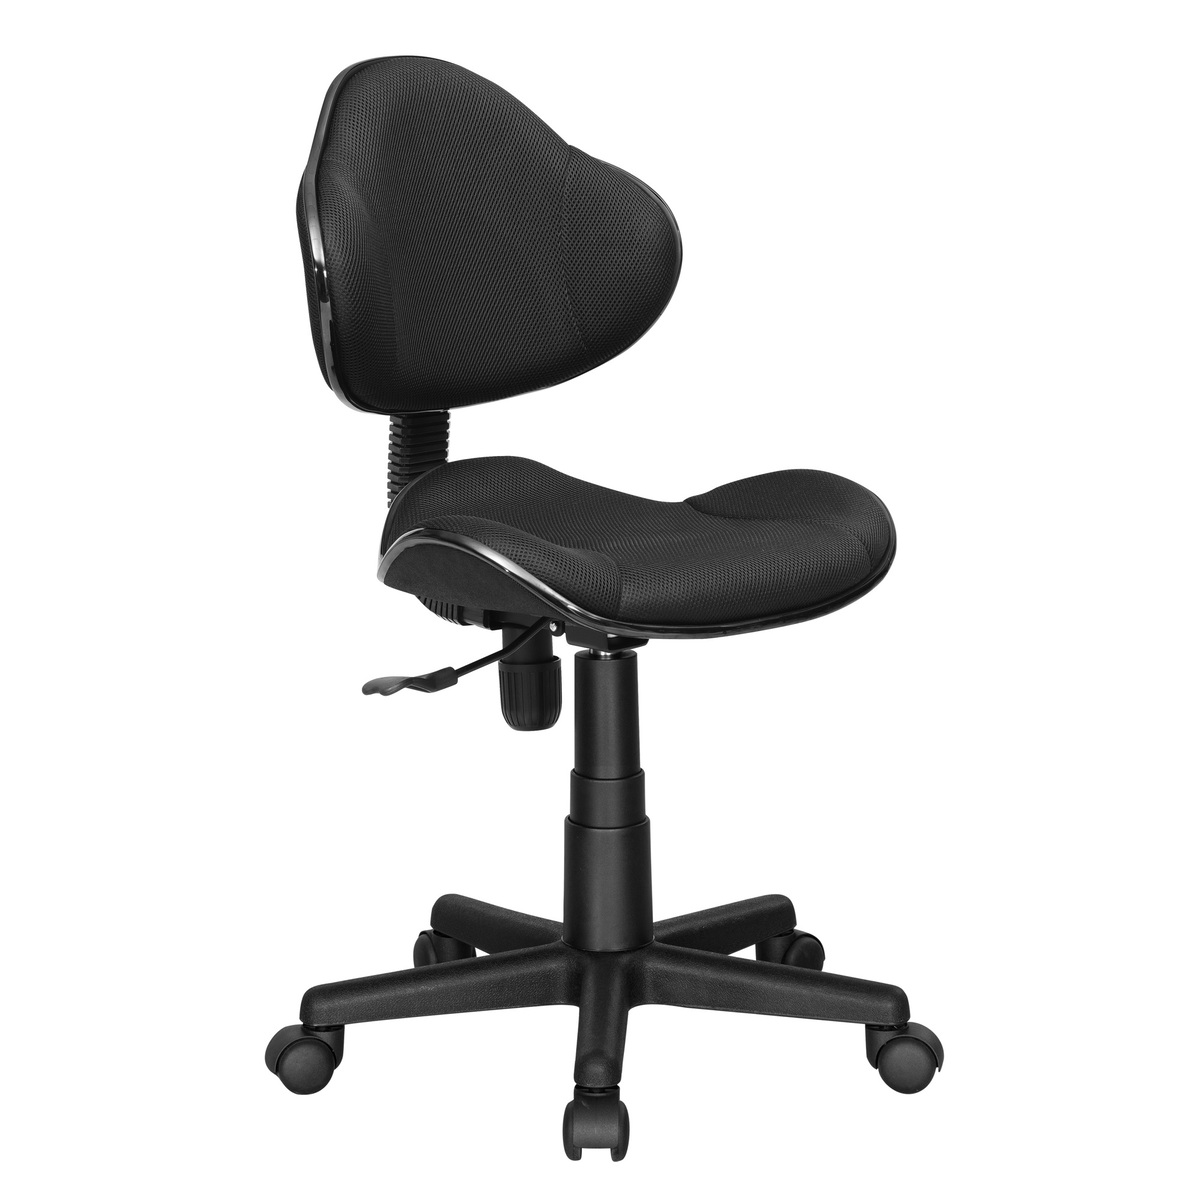 Maple Leaf Adjustable Kids Chair, Office, Computer Chair for Students With Swivel Wheels Black QZYG2B